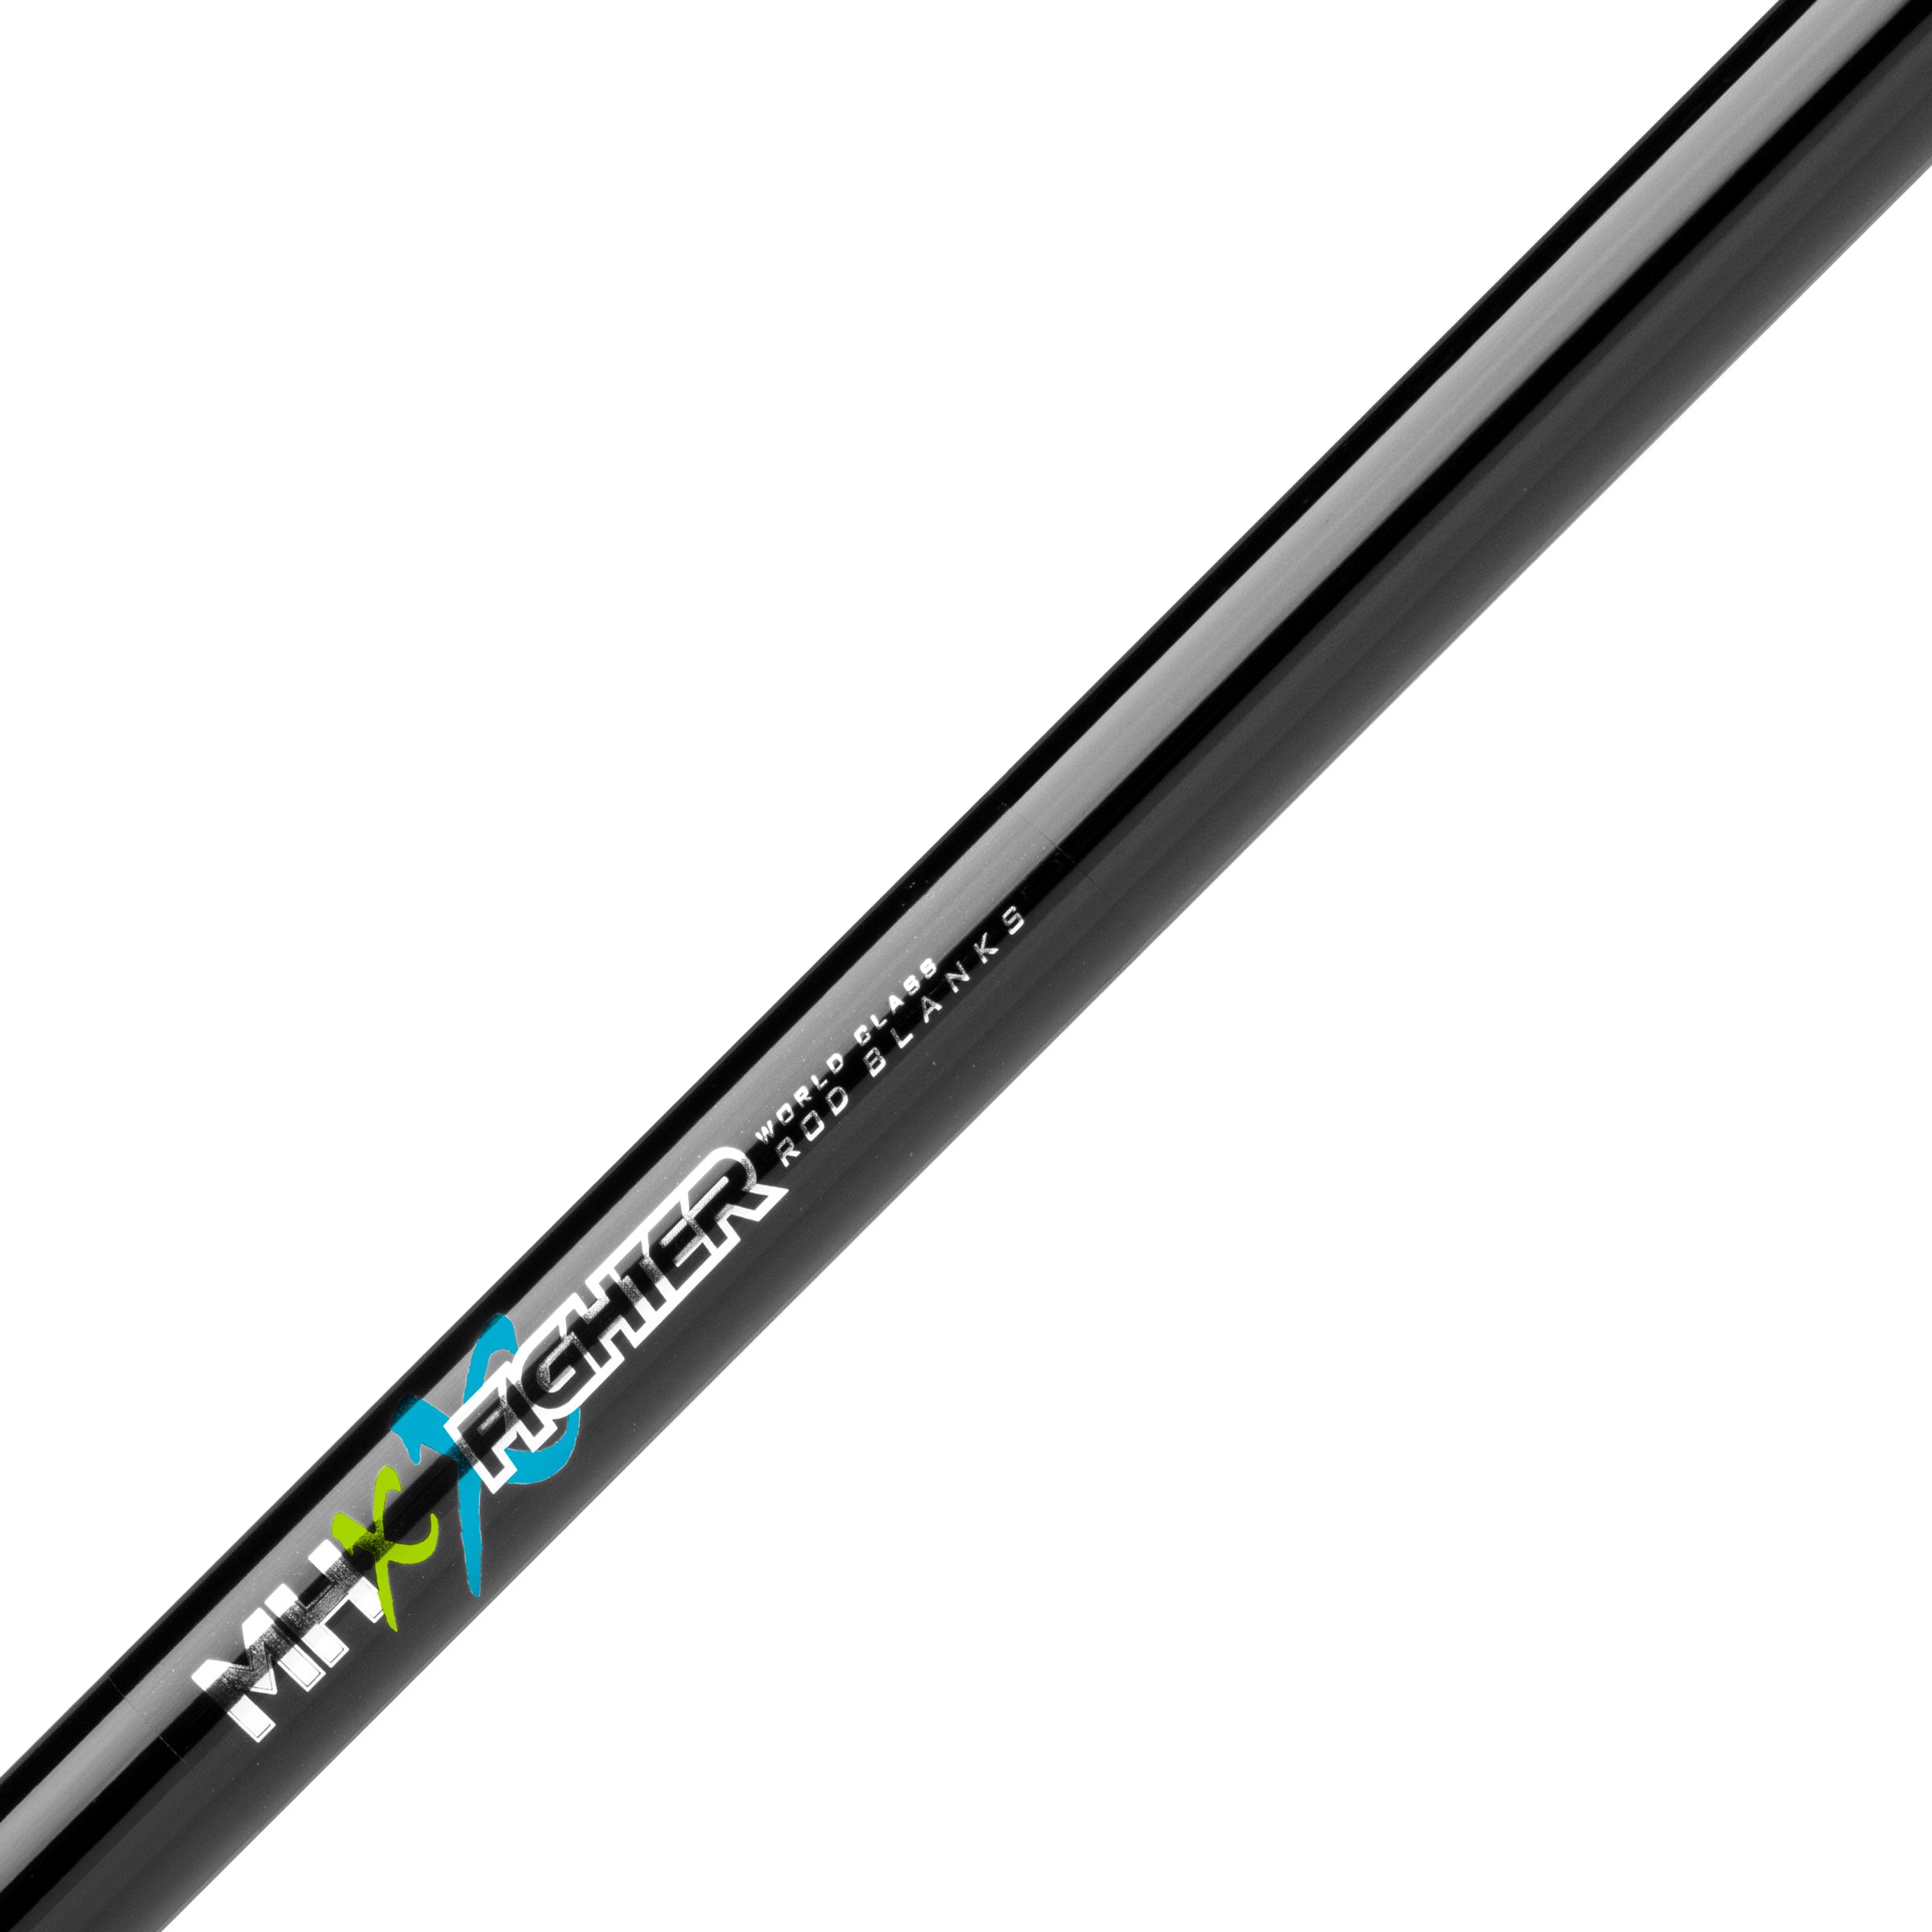 MHX 7'0" X-Light X-Fighter Offshore Graphite Composite Rod Blank XF700XL